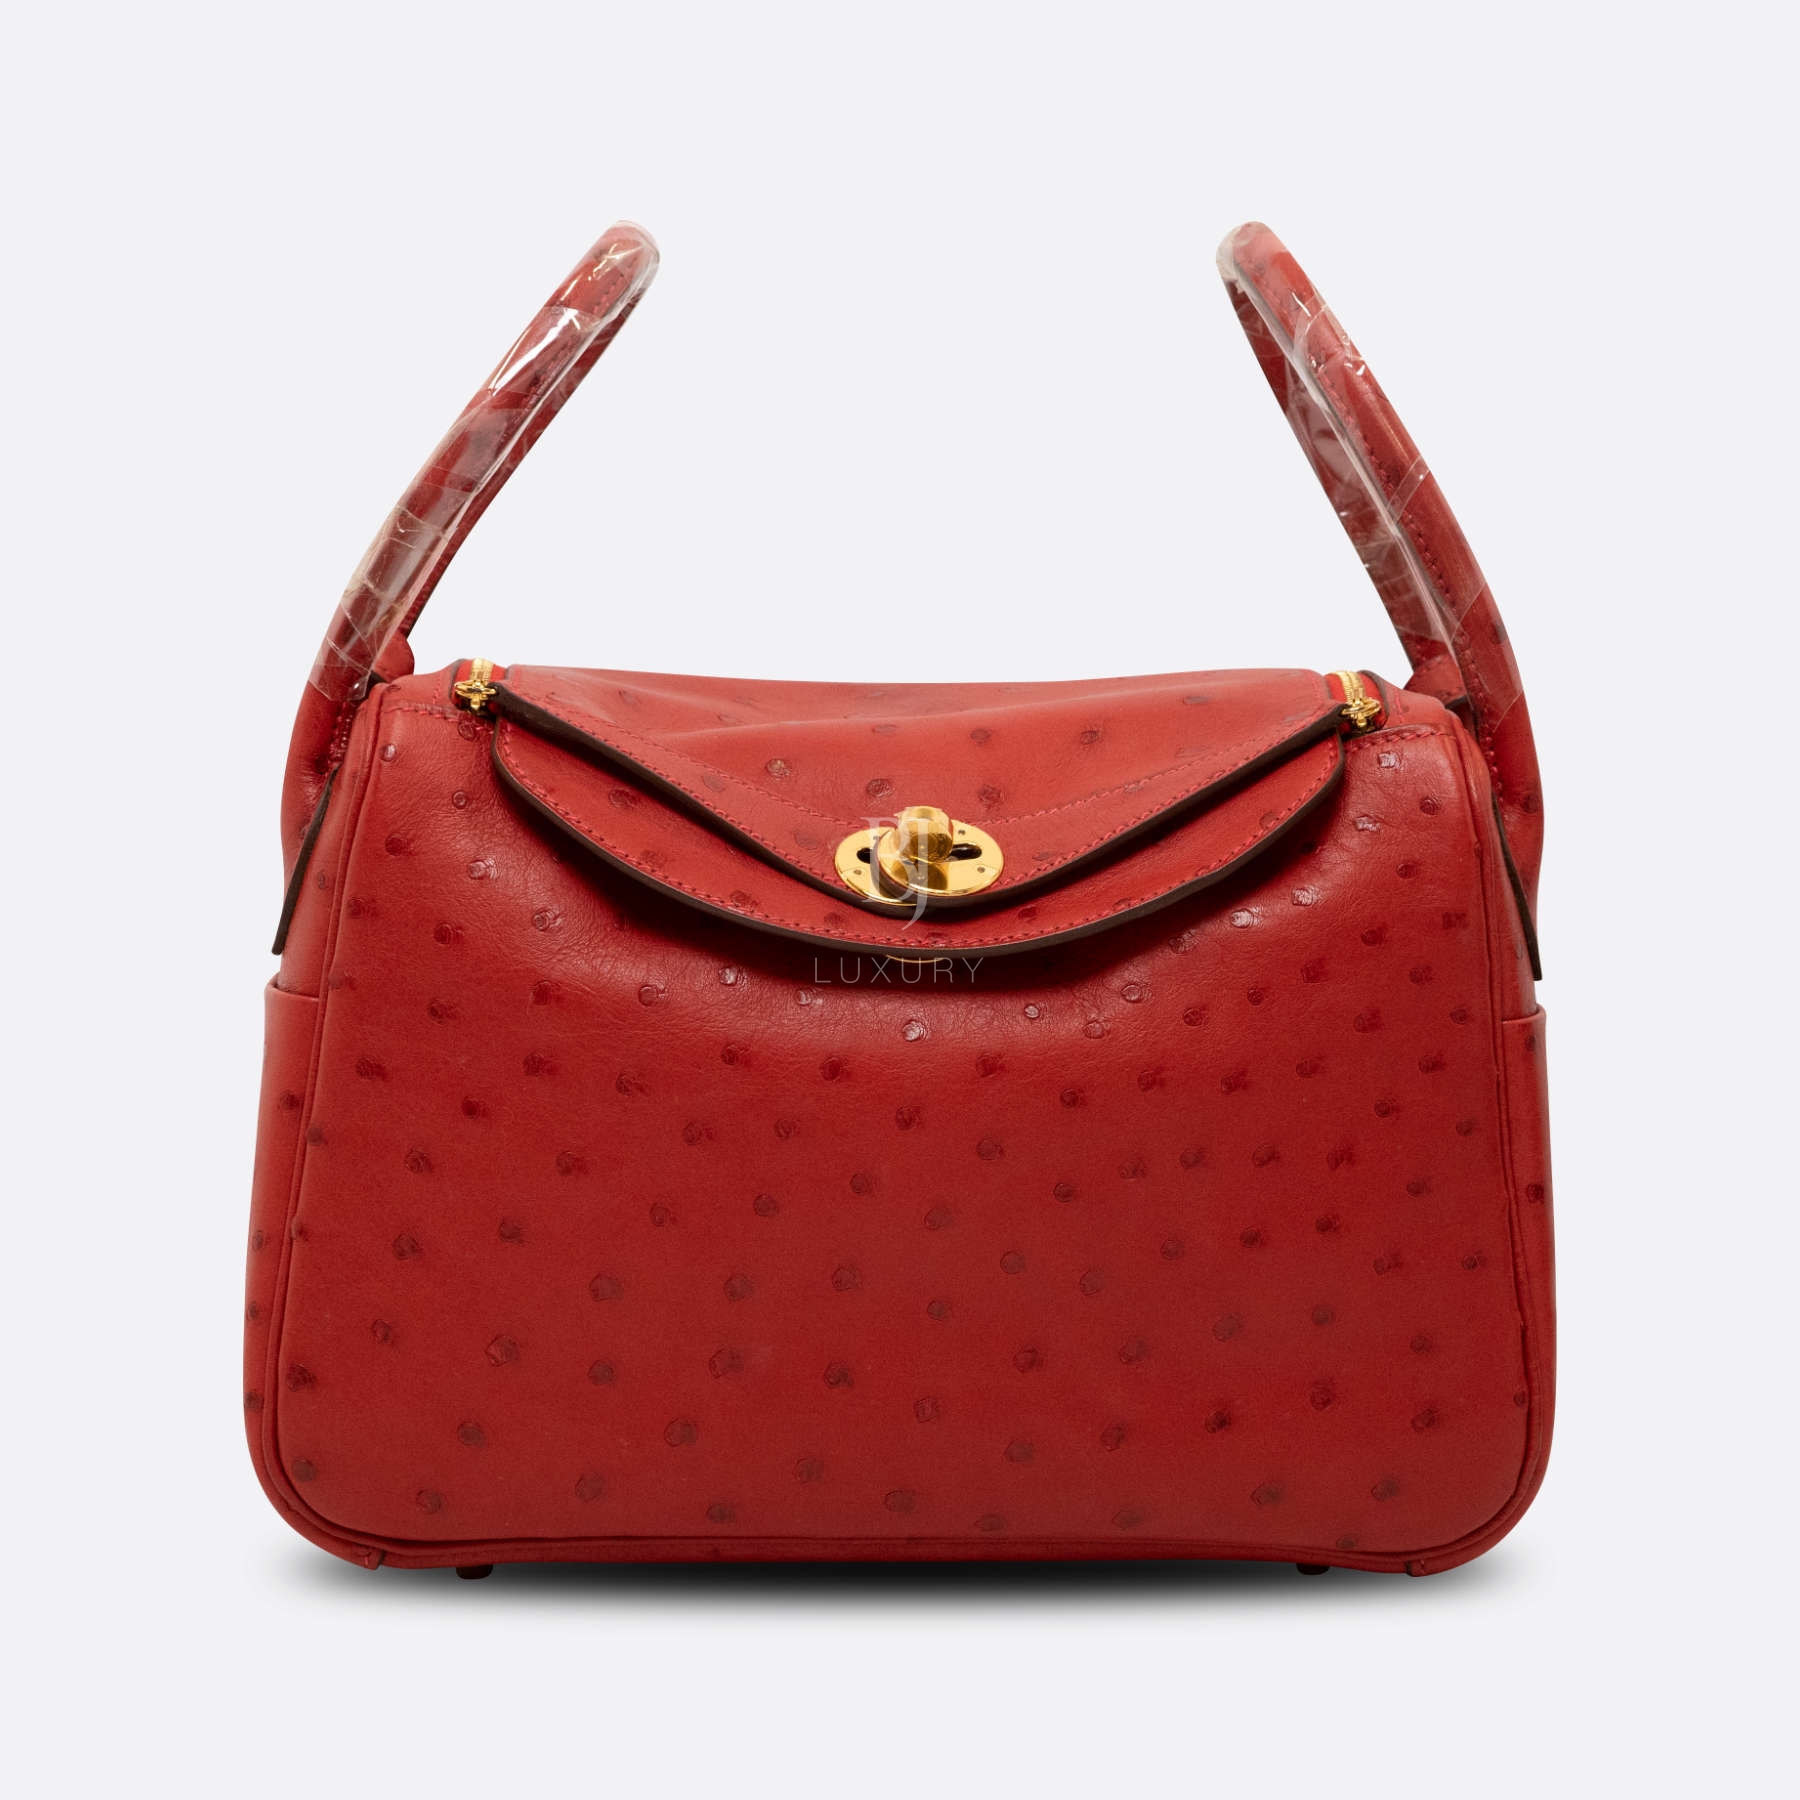 HERMES-LINDY-26-ROUGEVIF-OSTRICH-4320 front.jpg